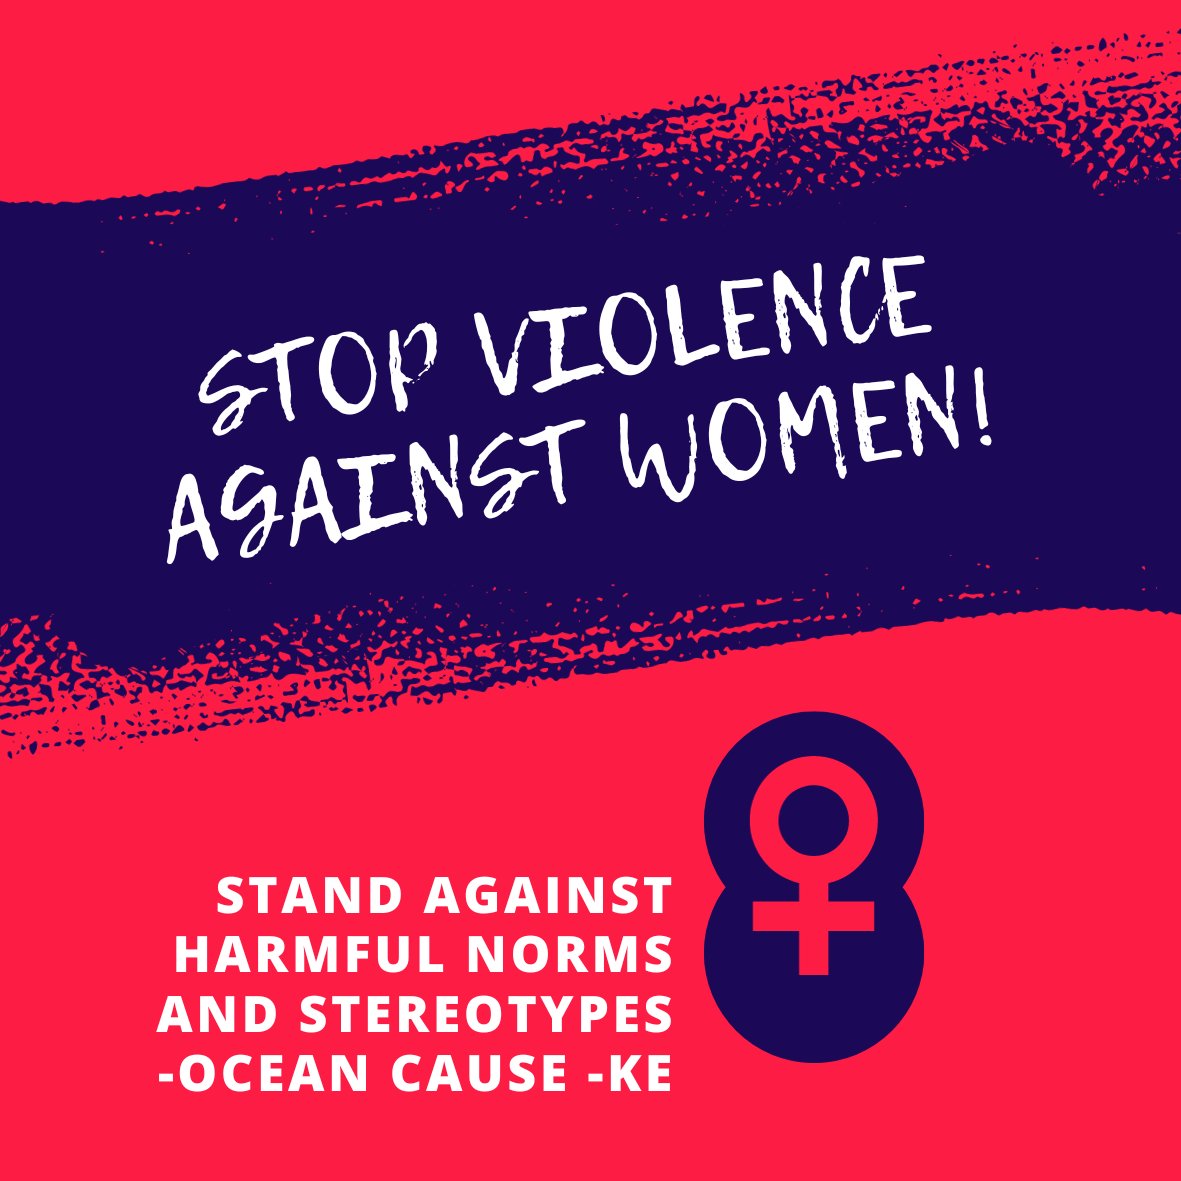 Day 10: 'Take a stand against harmful norms and stereotypes. Together, we can challenge and change societal expectations to build a more inclusive world. #BreakTheNorms #ChangeForEquality #16DaysOfActivism #OceanCauseKenya